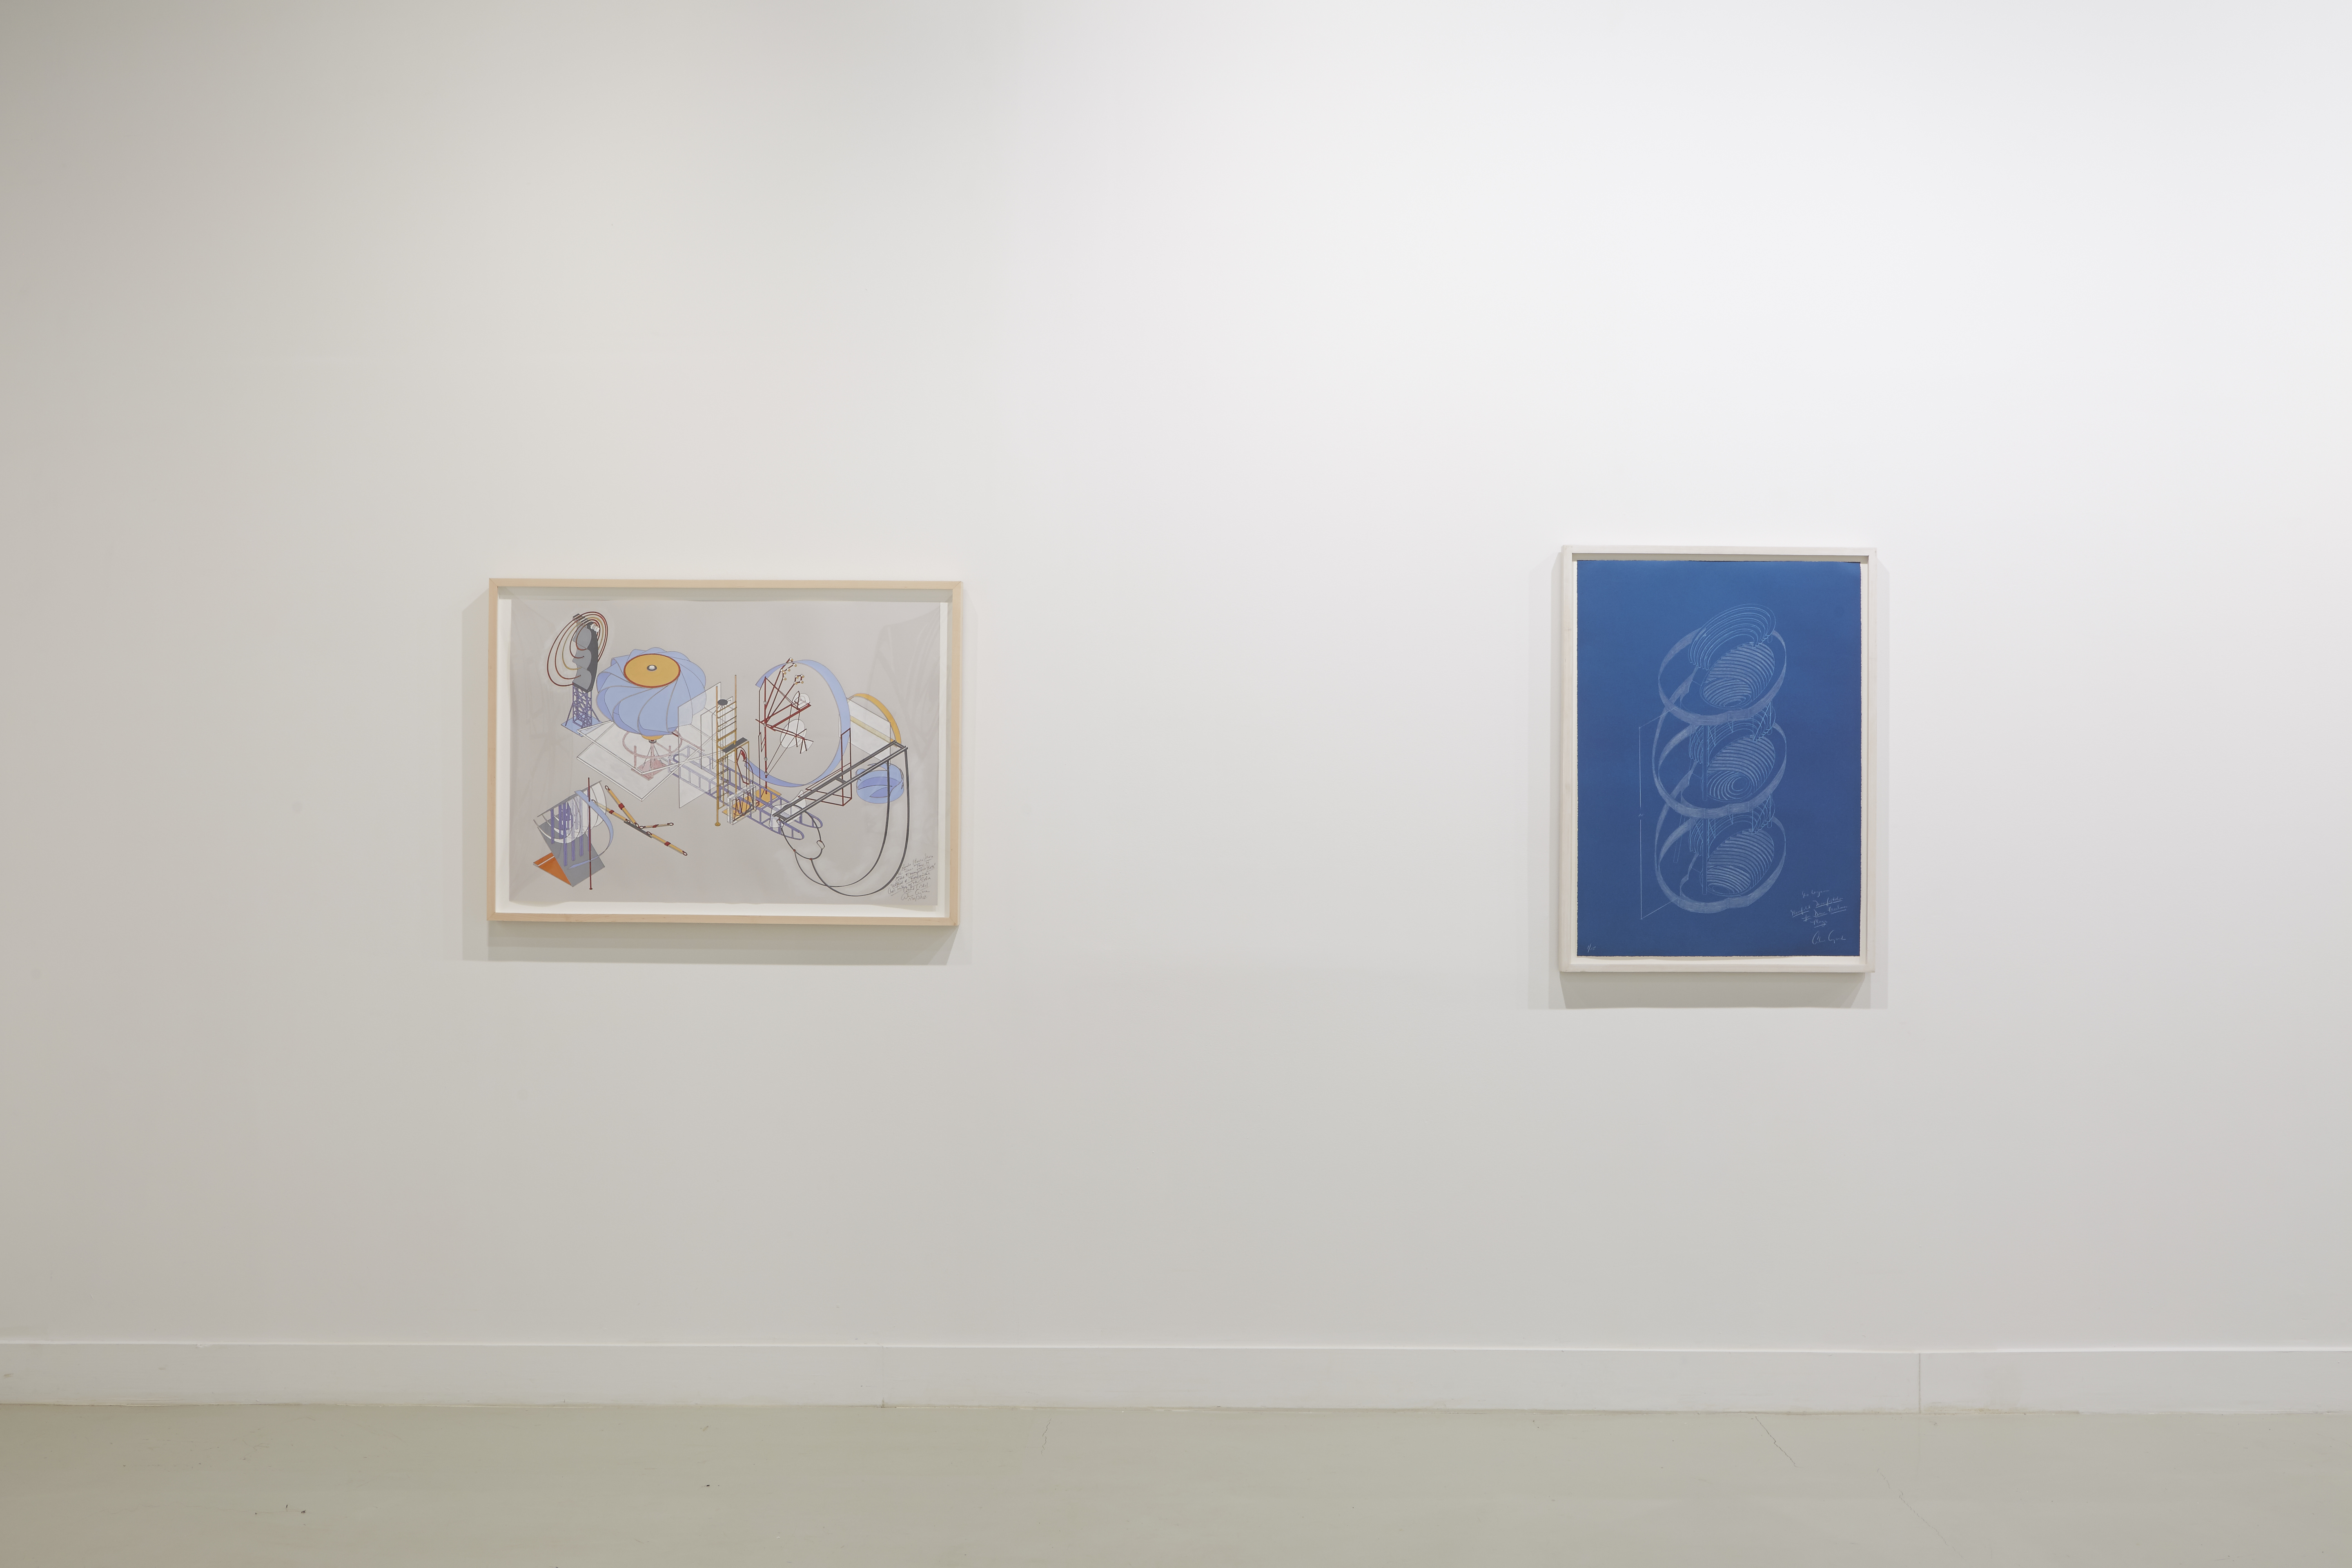 Installation view from "Coordinates: Drawings and Prints Marking Five Exhibitions at Beaver College (1977-84)" with two panels displaying blue-print related patterns.